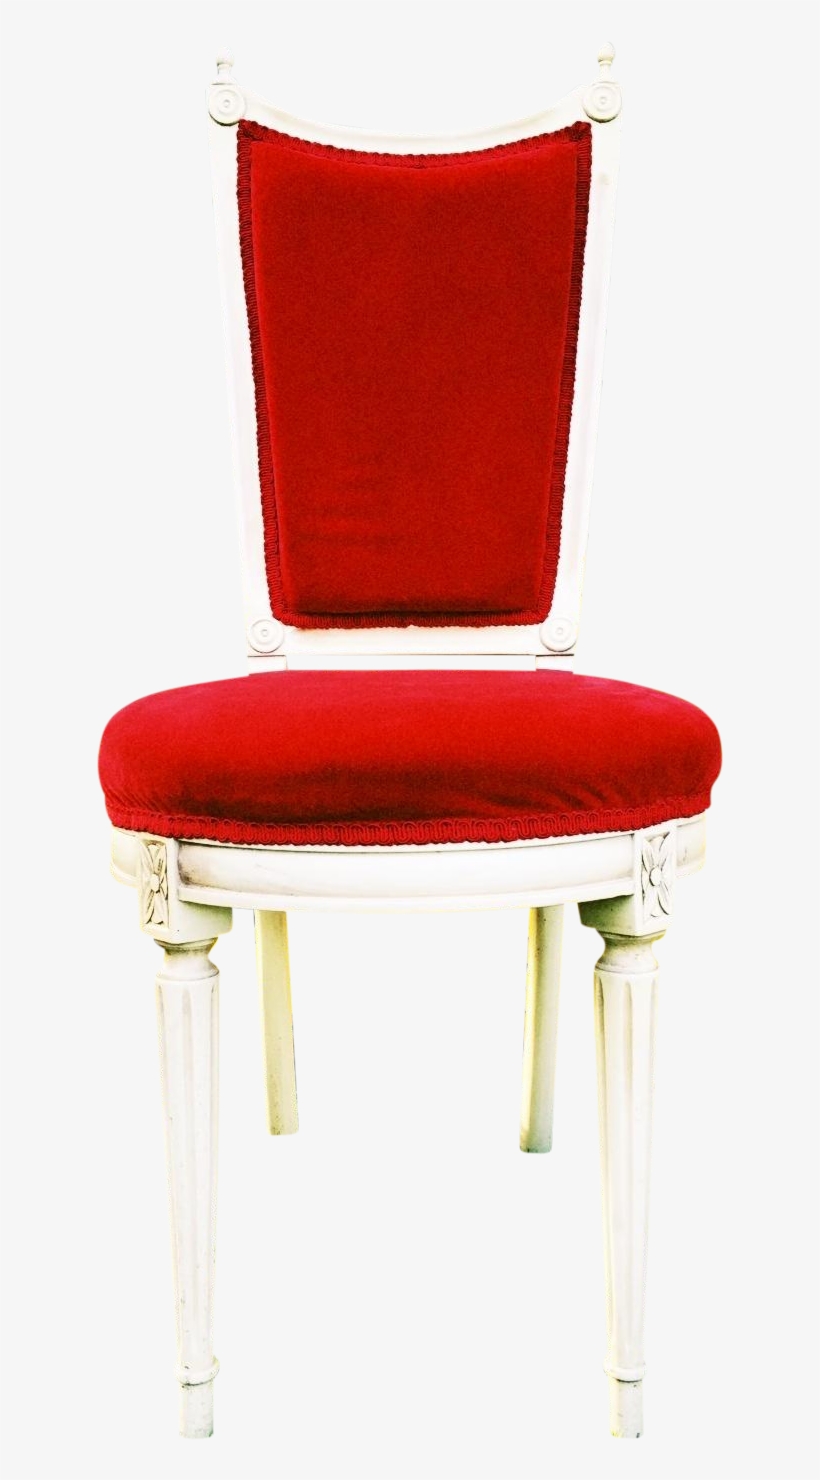 Vintage French Provincial Velvet Red Chair On Chairish - Chair, transparent png #9788407